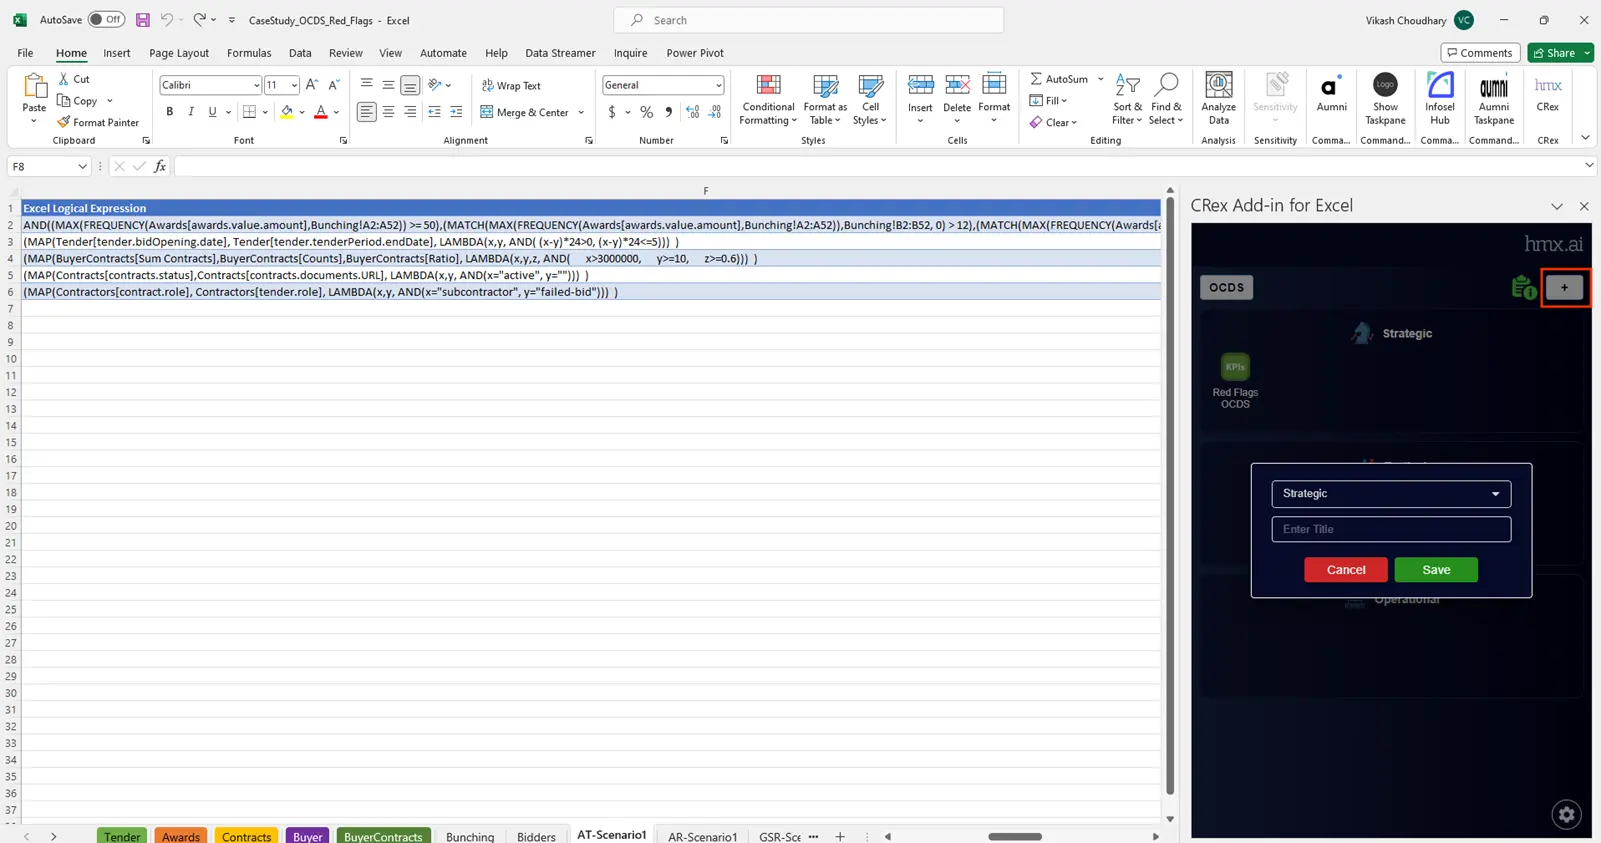 hmx-a-microsoft-excel-add-in-for-goal-prediction-01.webp